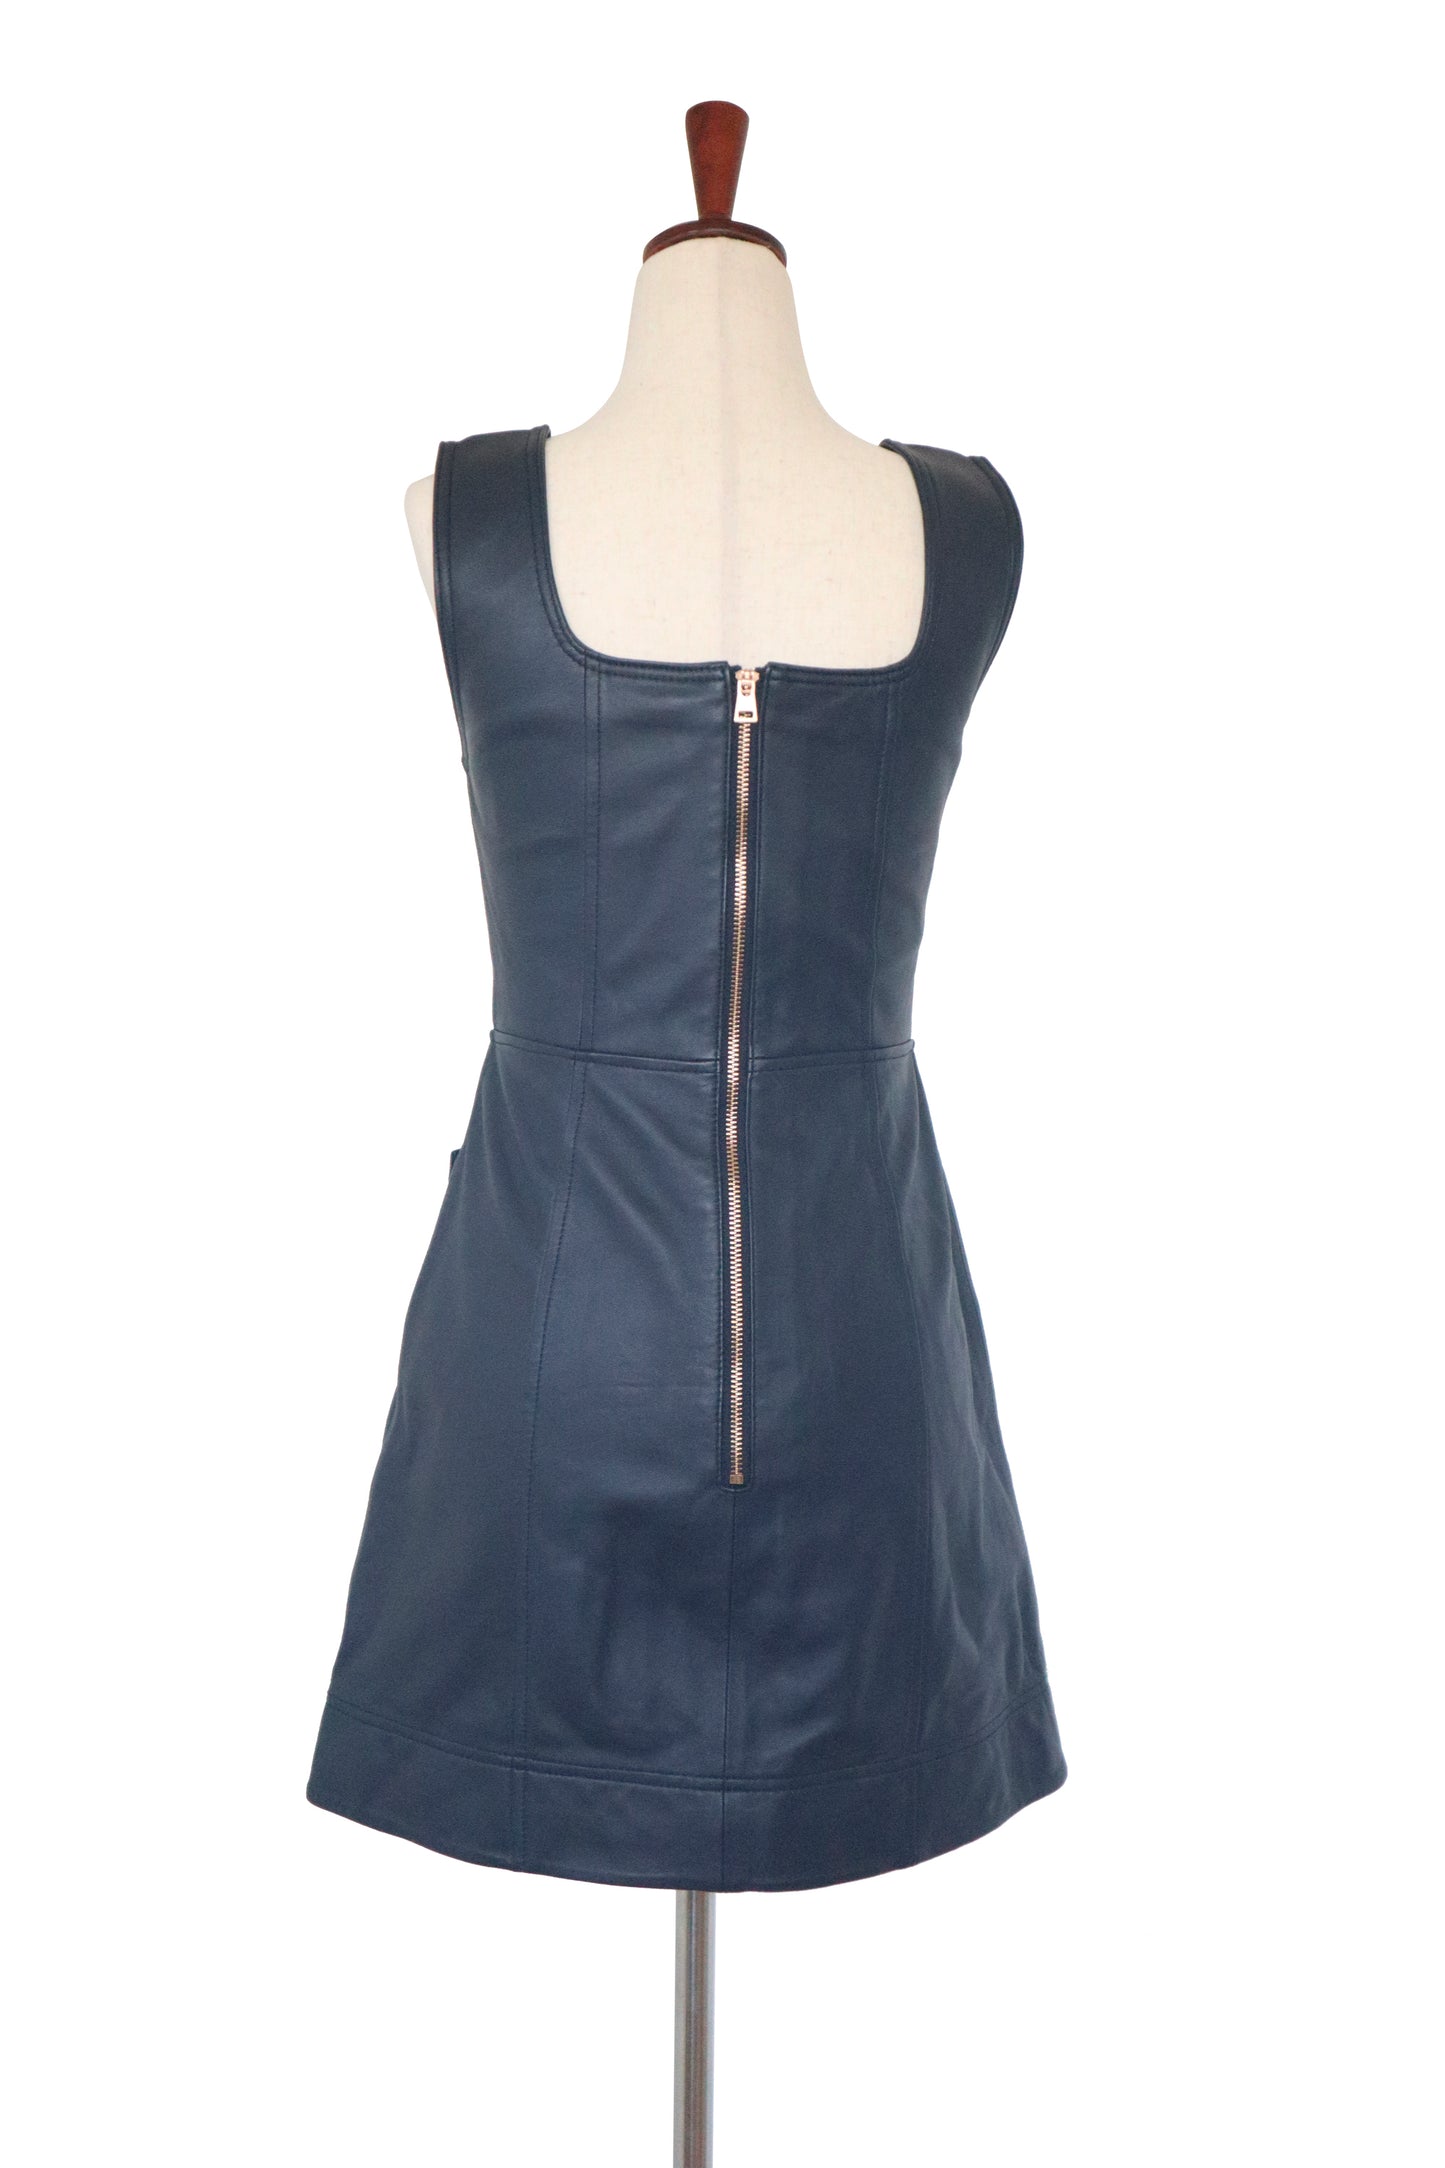 ALICE MCCALL - Navy Leather Dress - US 4